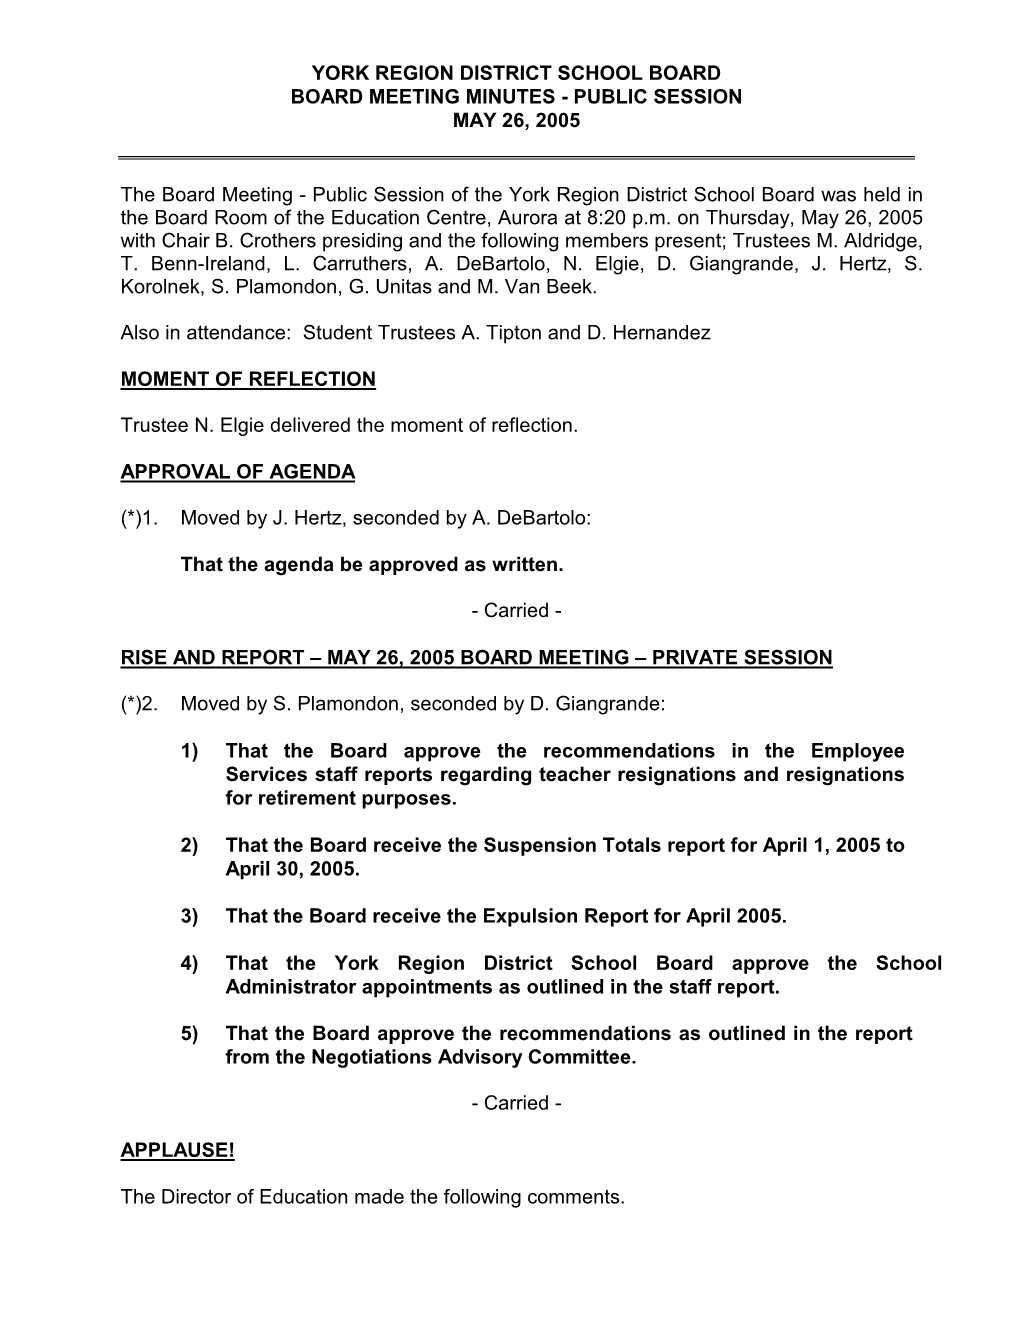 May 26, 2005 Public Board Minutes